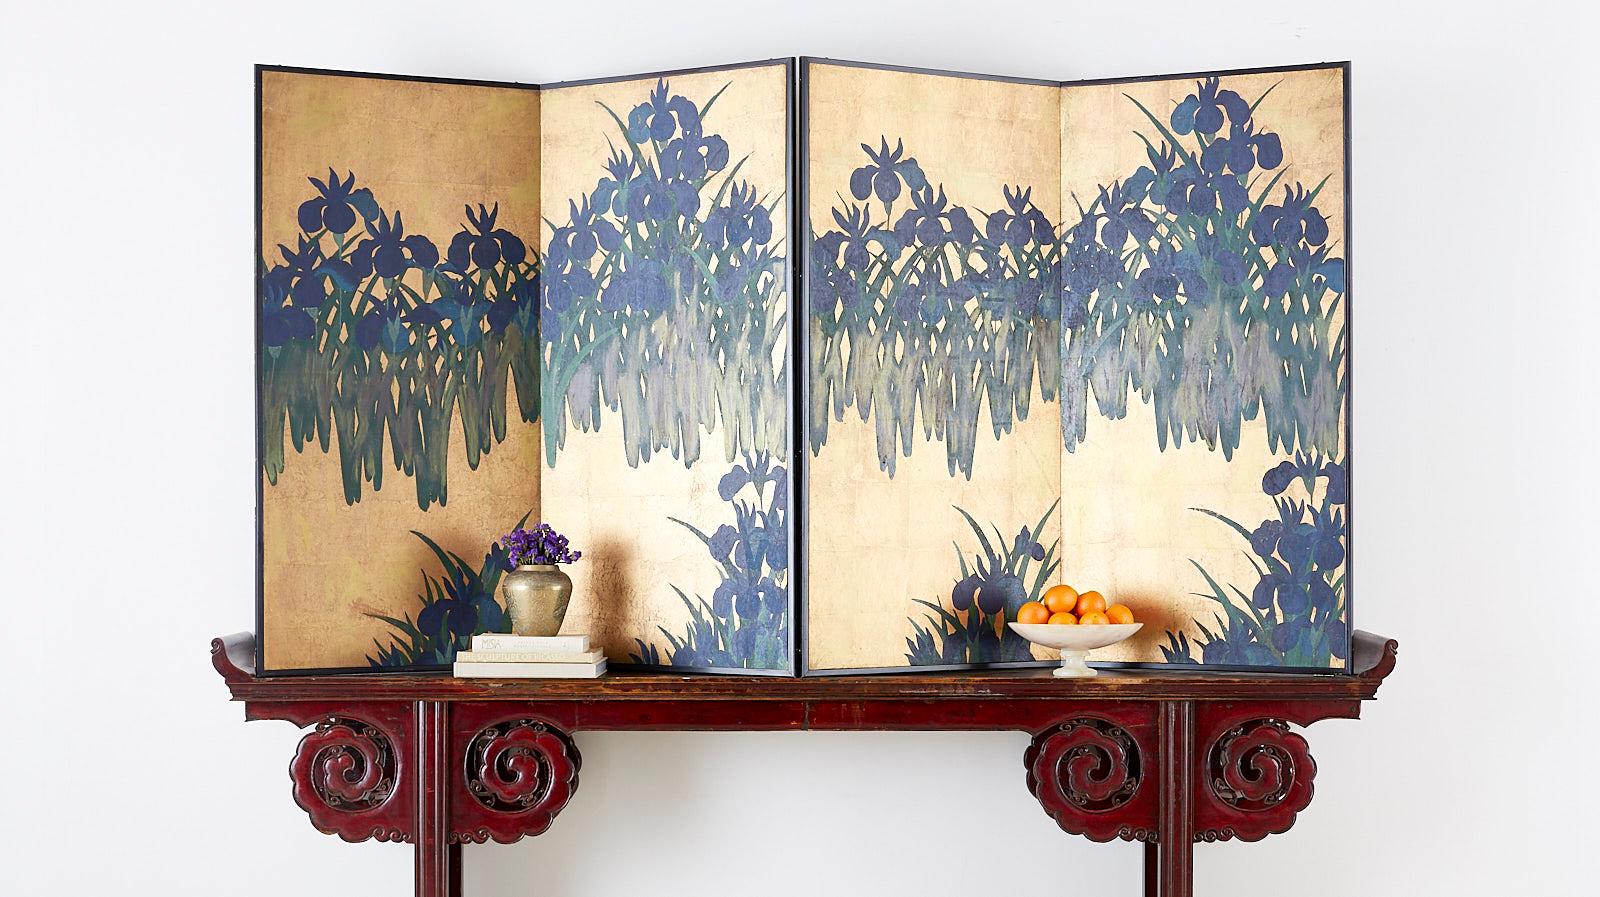 Dramatic pair of Japanese two-panel screens depicting Kakitsubata or flowering Irises on a gilt gold leaf background after Ogata Korin (Japanese 1658-1716). The screens feature abstracted blue Japanese irises in bloom with green foliage having a